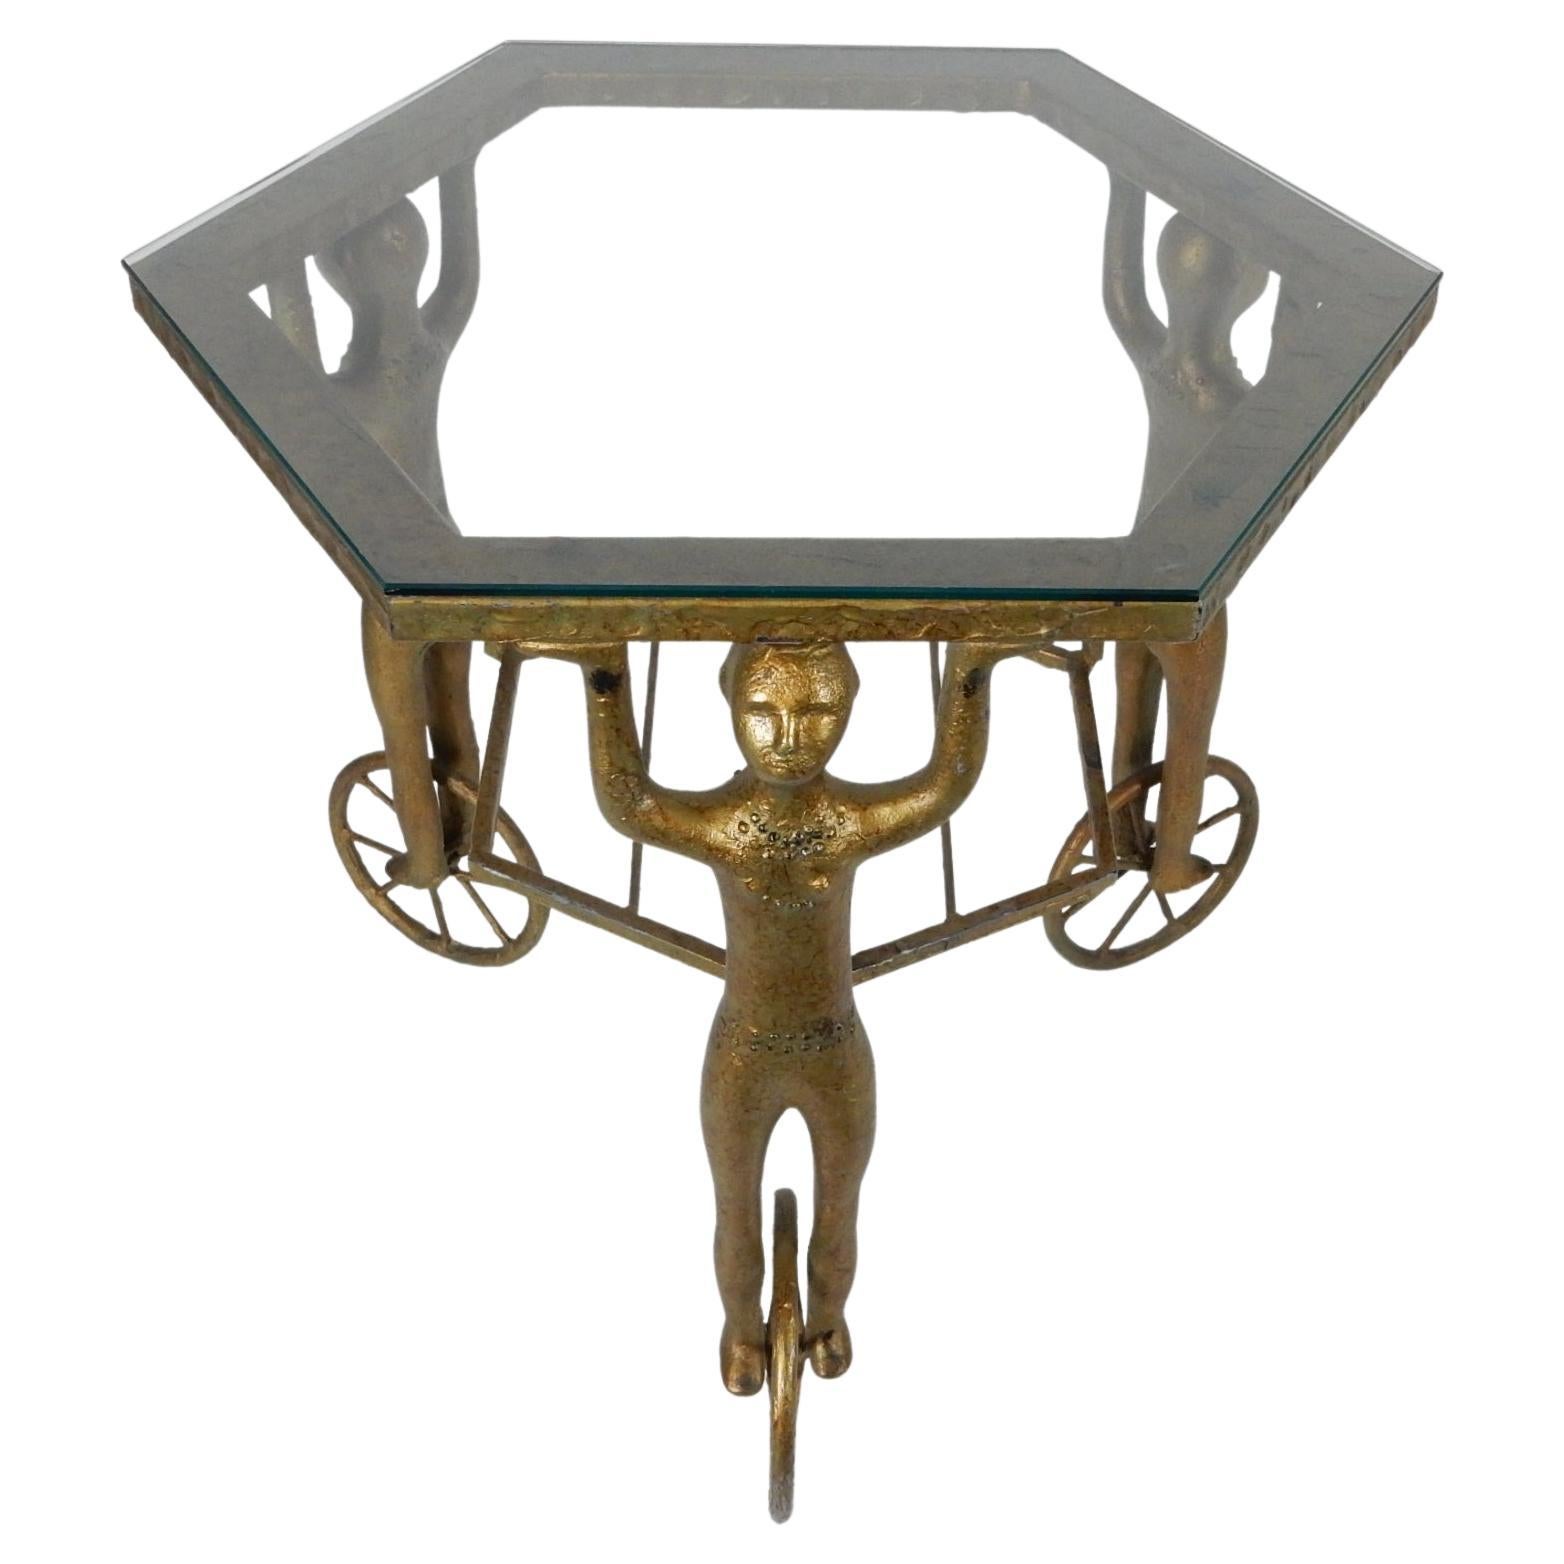 Incredible mid 20th century Gueridon table cast in iron with gold enamel finish.
Legs are androgynous figures standing on wheels in the style of Alberto Giacometti.
Not signed or marked by designer. Possibly a one-off cast studio piece.
We could not